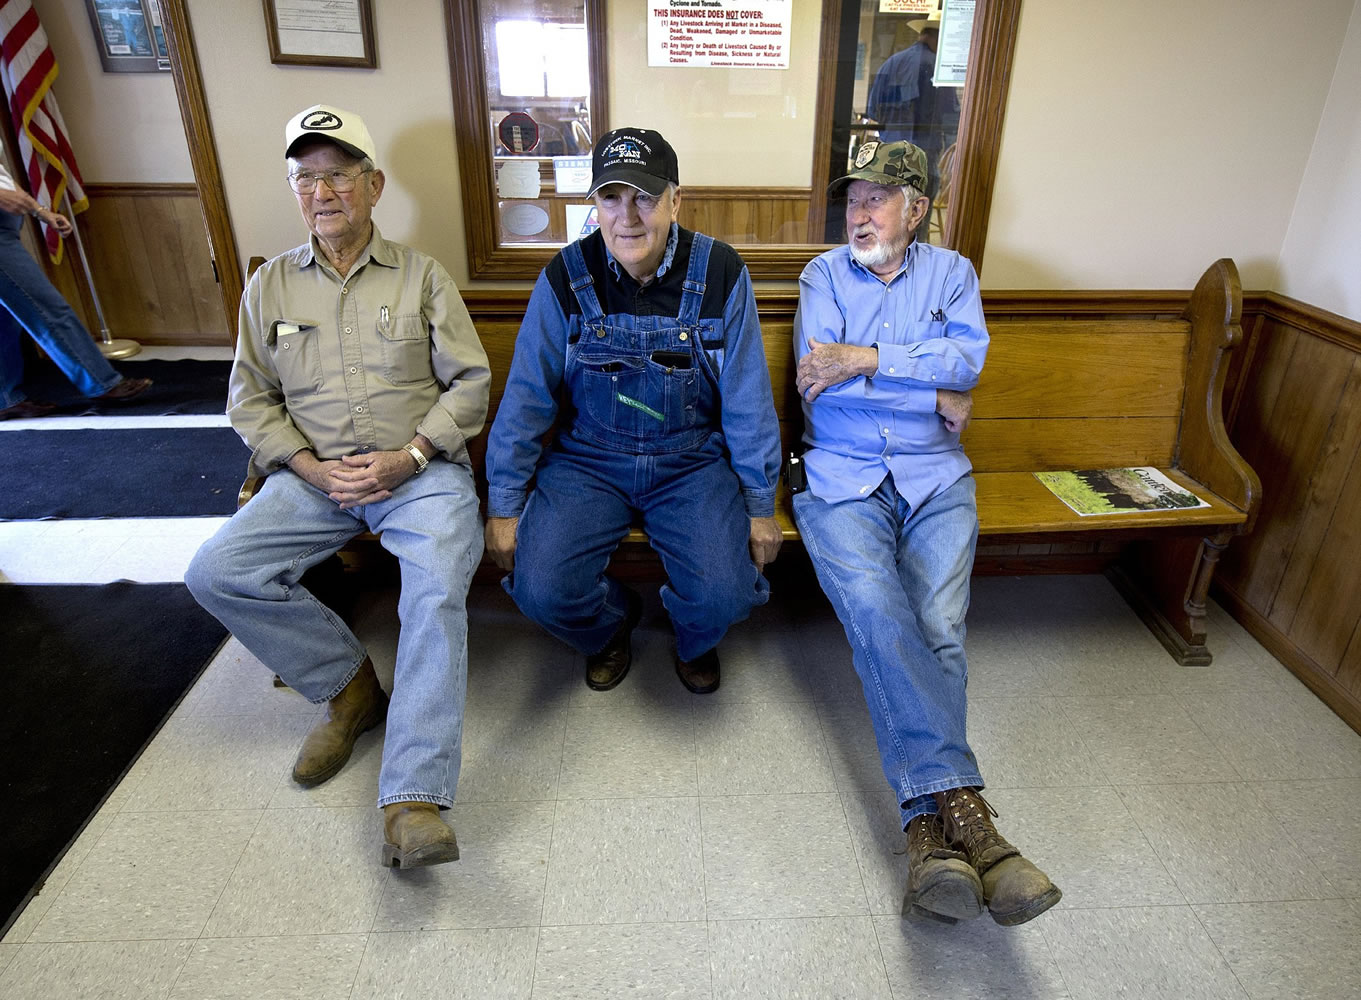 Herman Shubert, from left, Ed Shouse and Tom McGuire wait for the auction to start on April 30 at the Mo-Kan Livestock Market in Passaic, Mo.